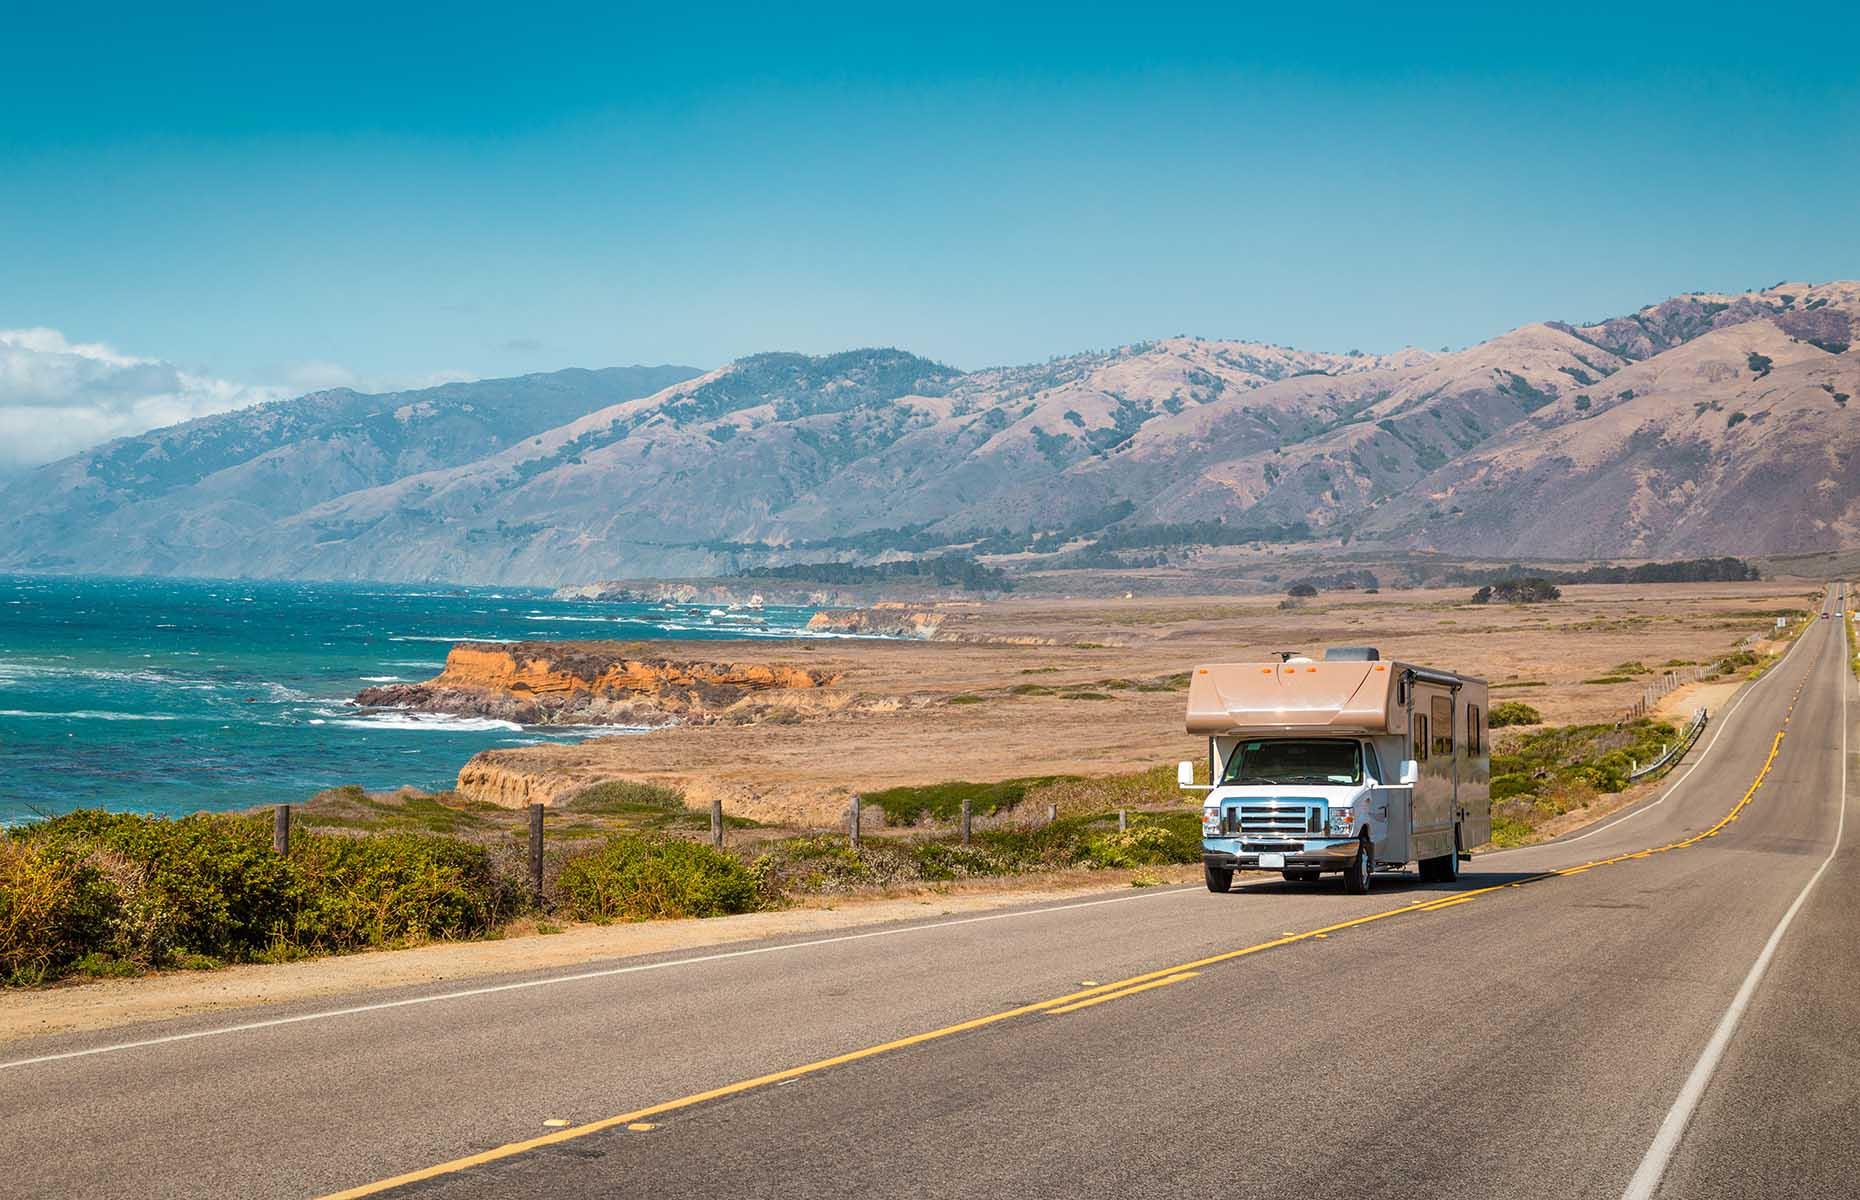 <p>An RV affords you the freedom to take to the open road and the USA has a staggering number of tried-and-tested routes perfect for a motorhome adventure. From scenic byways looping through national parks to epic multi-state expeditions, these road trips will give you a summer to remember. </p>  <p><strong>Read on as we reveal the top journeys for RV road-trippers in America...</strong></p>